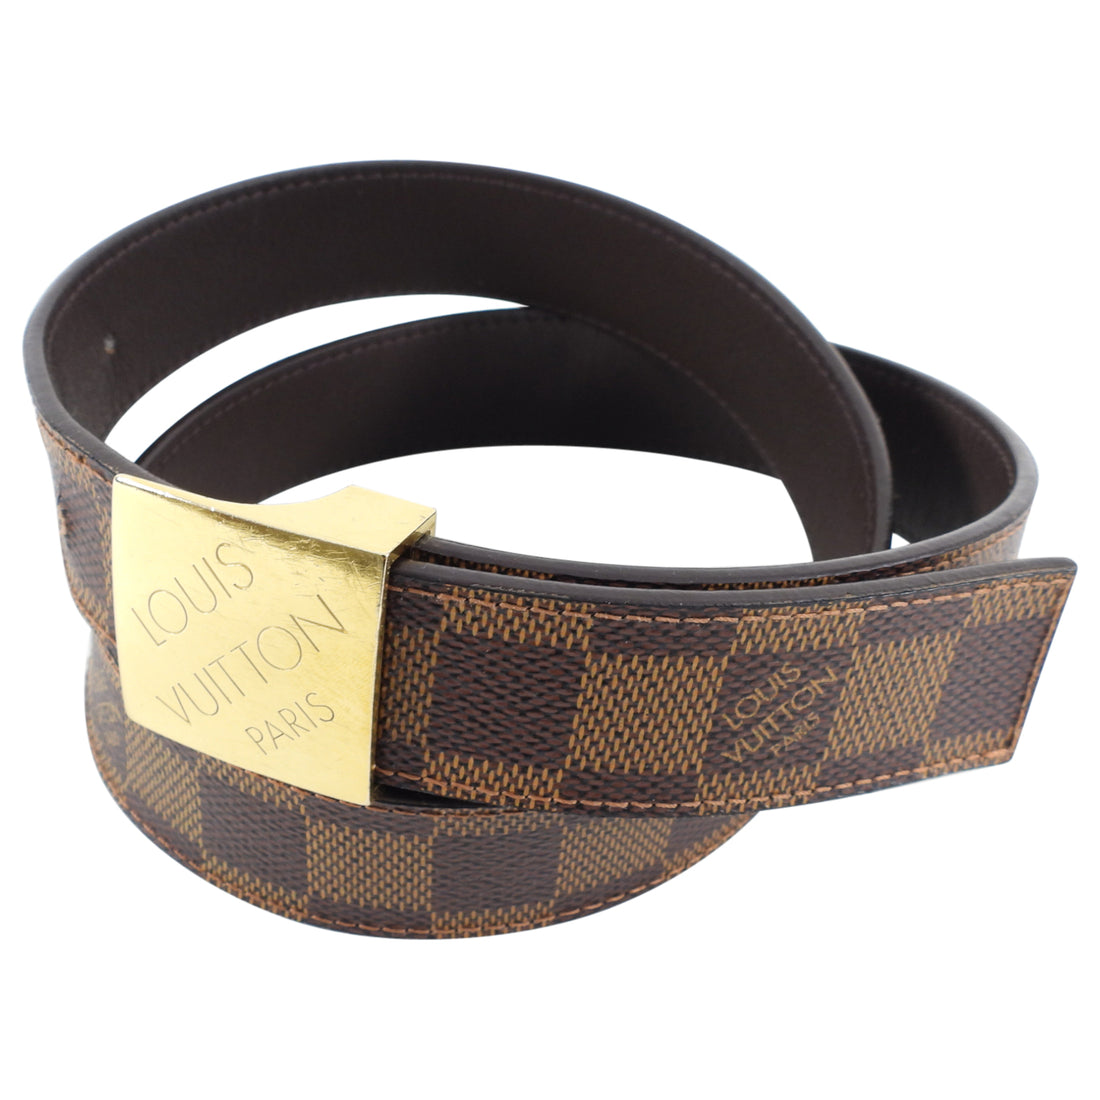 Louis VUITTON. Brown checkerboard coated canvas belt, si…